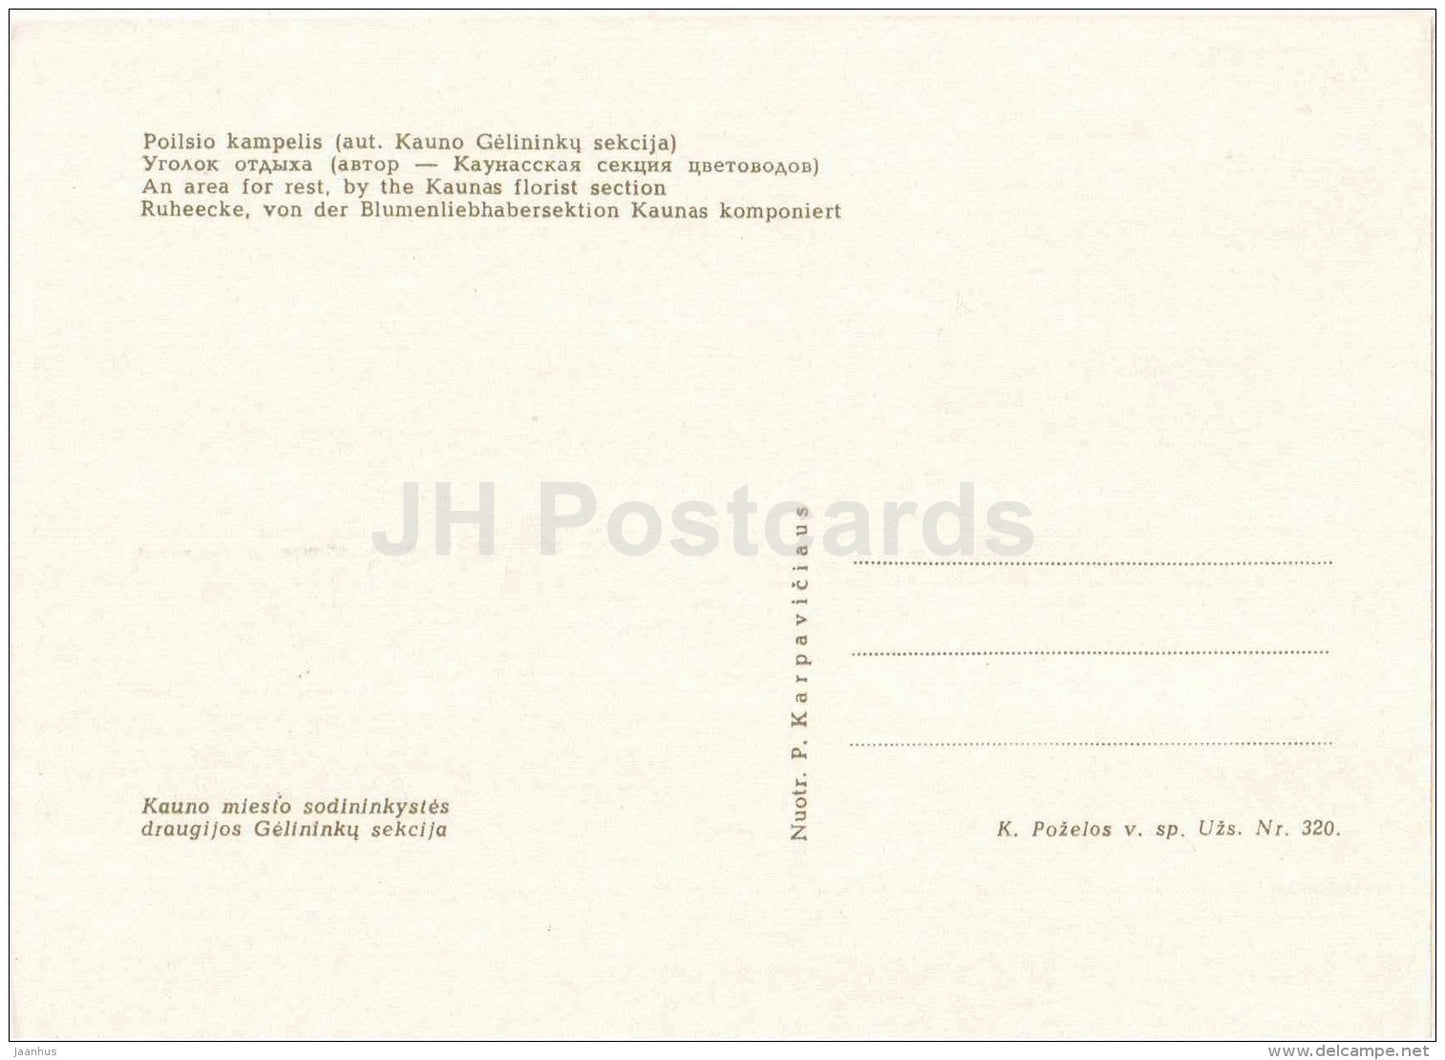 An Area for Rest by the Kaunas Florist Section - 1963 - Lithuania USSR - unused - JH Postcards